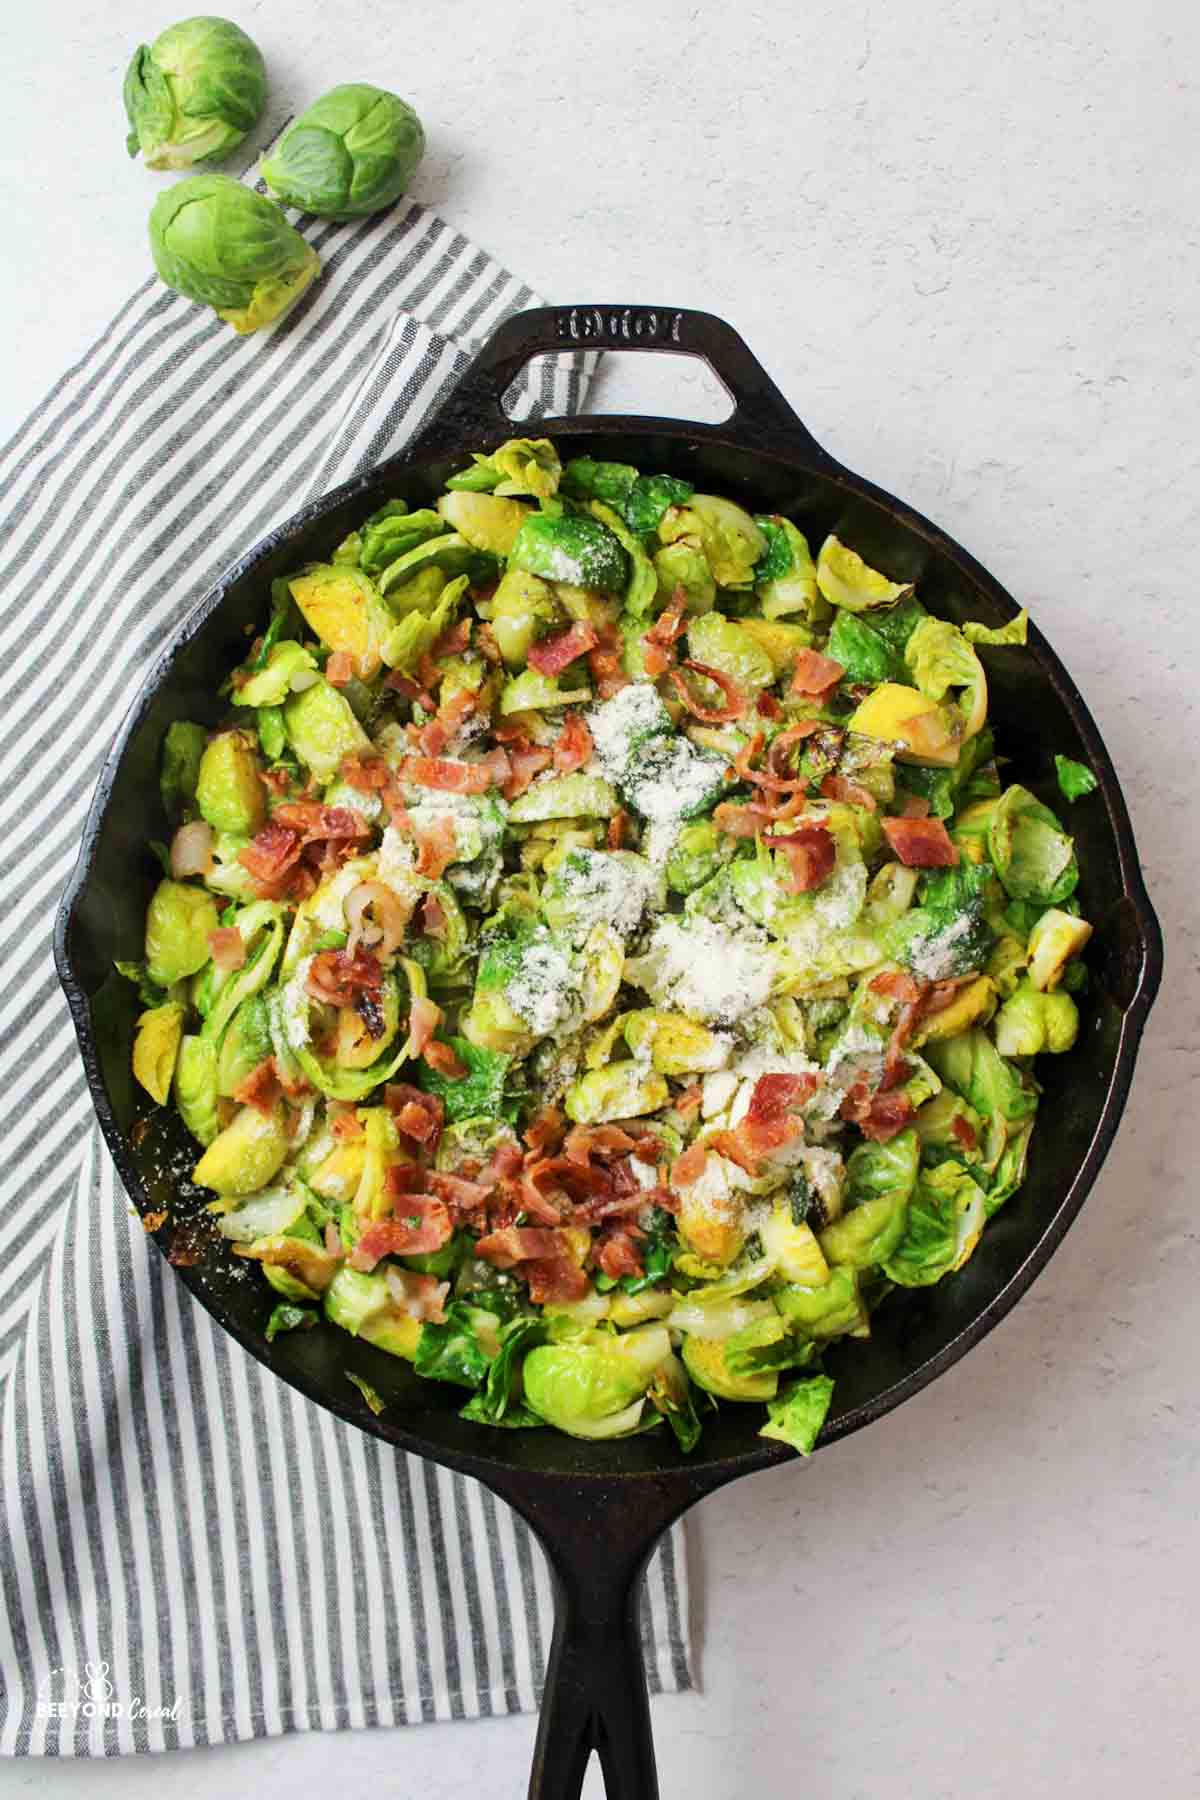 bacon and ranch seasoning added to cooked brussel sprouts in cast iron skillet